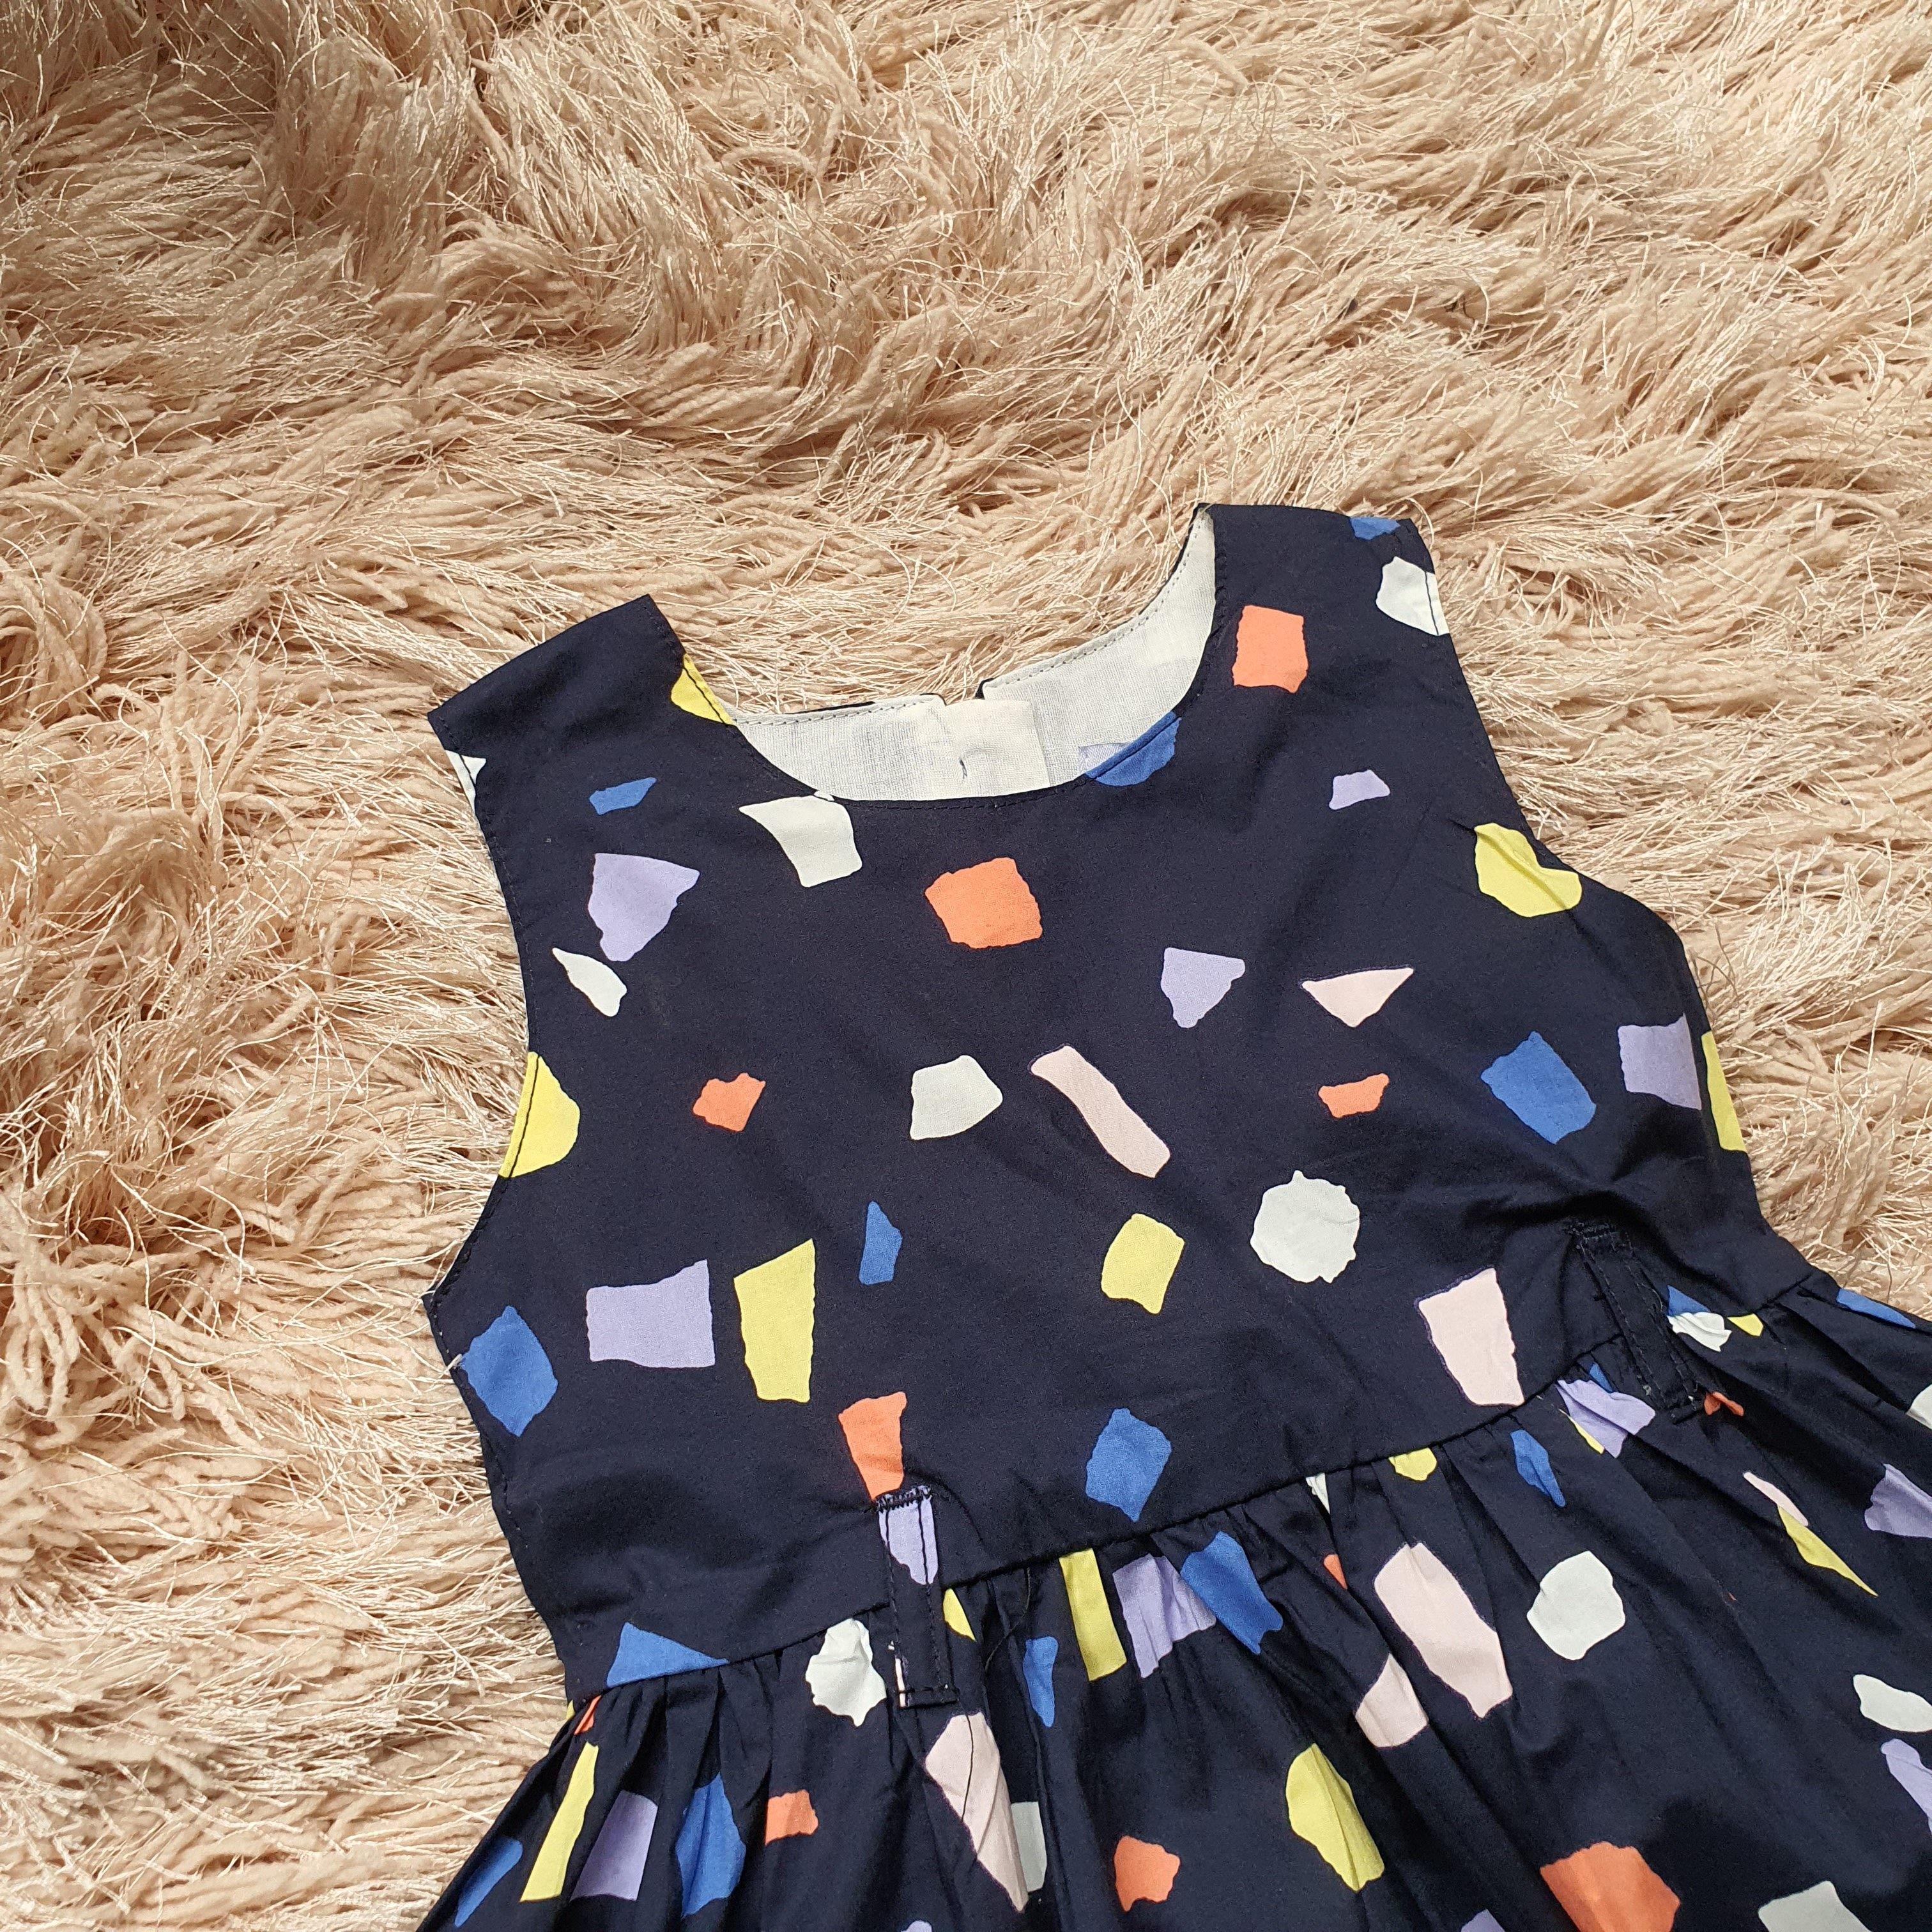 Berry Blue Shapes Printed Girls Frock - Italiano.pk